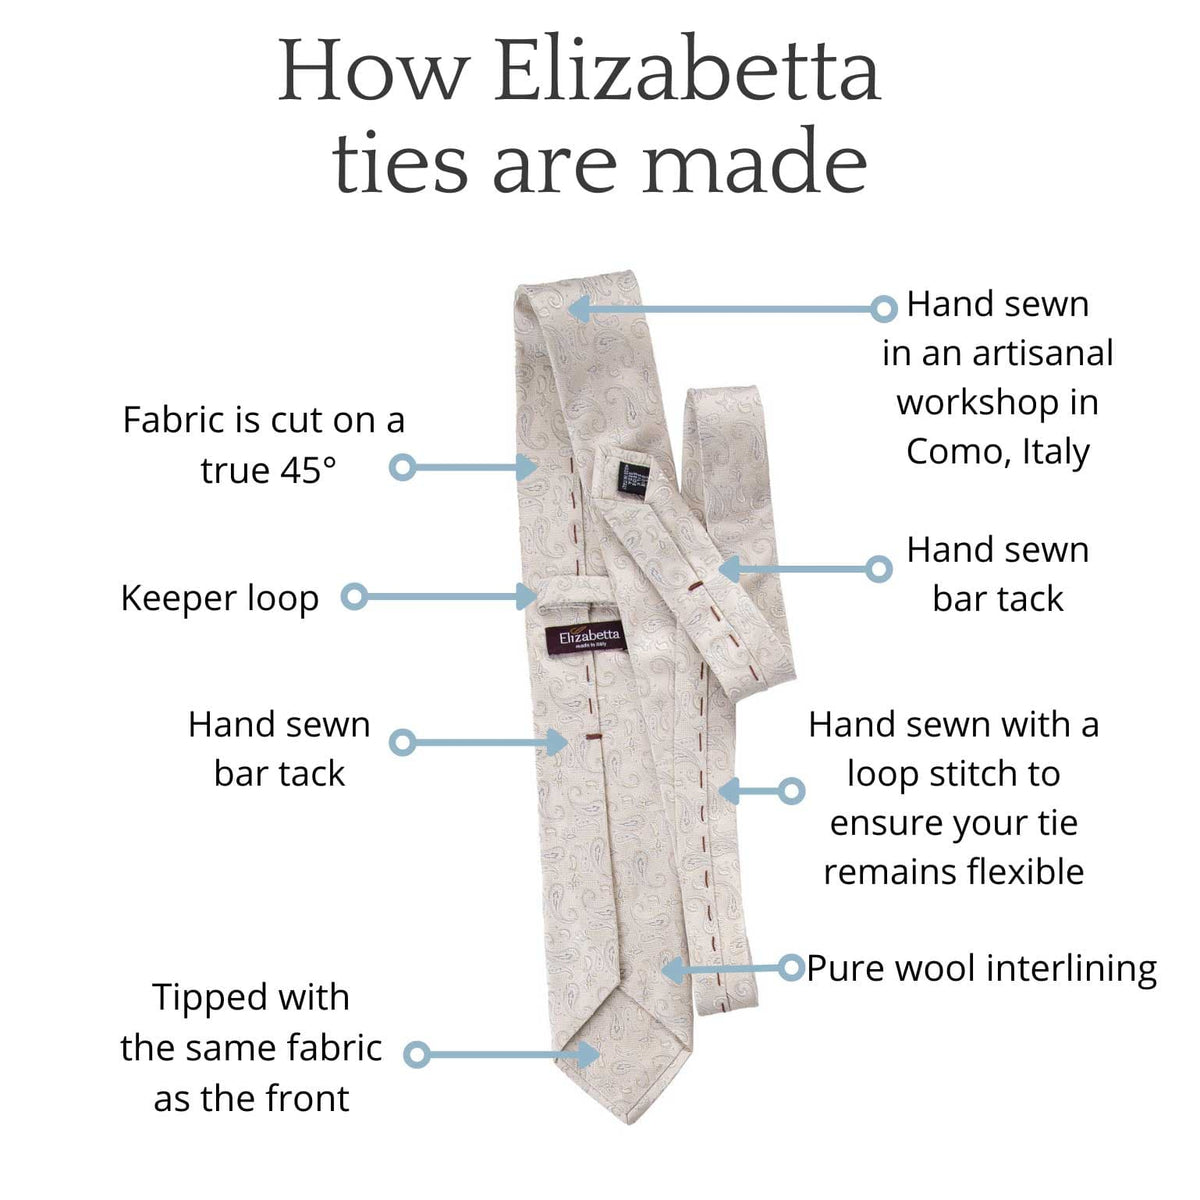 How an Elizabetta ties are made